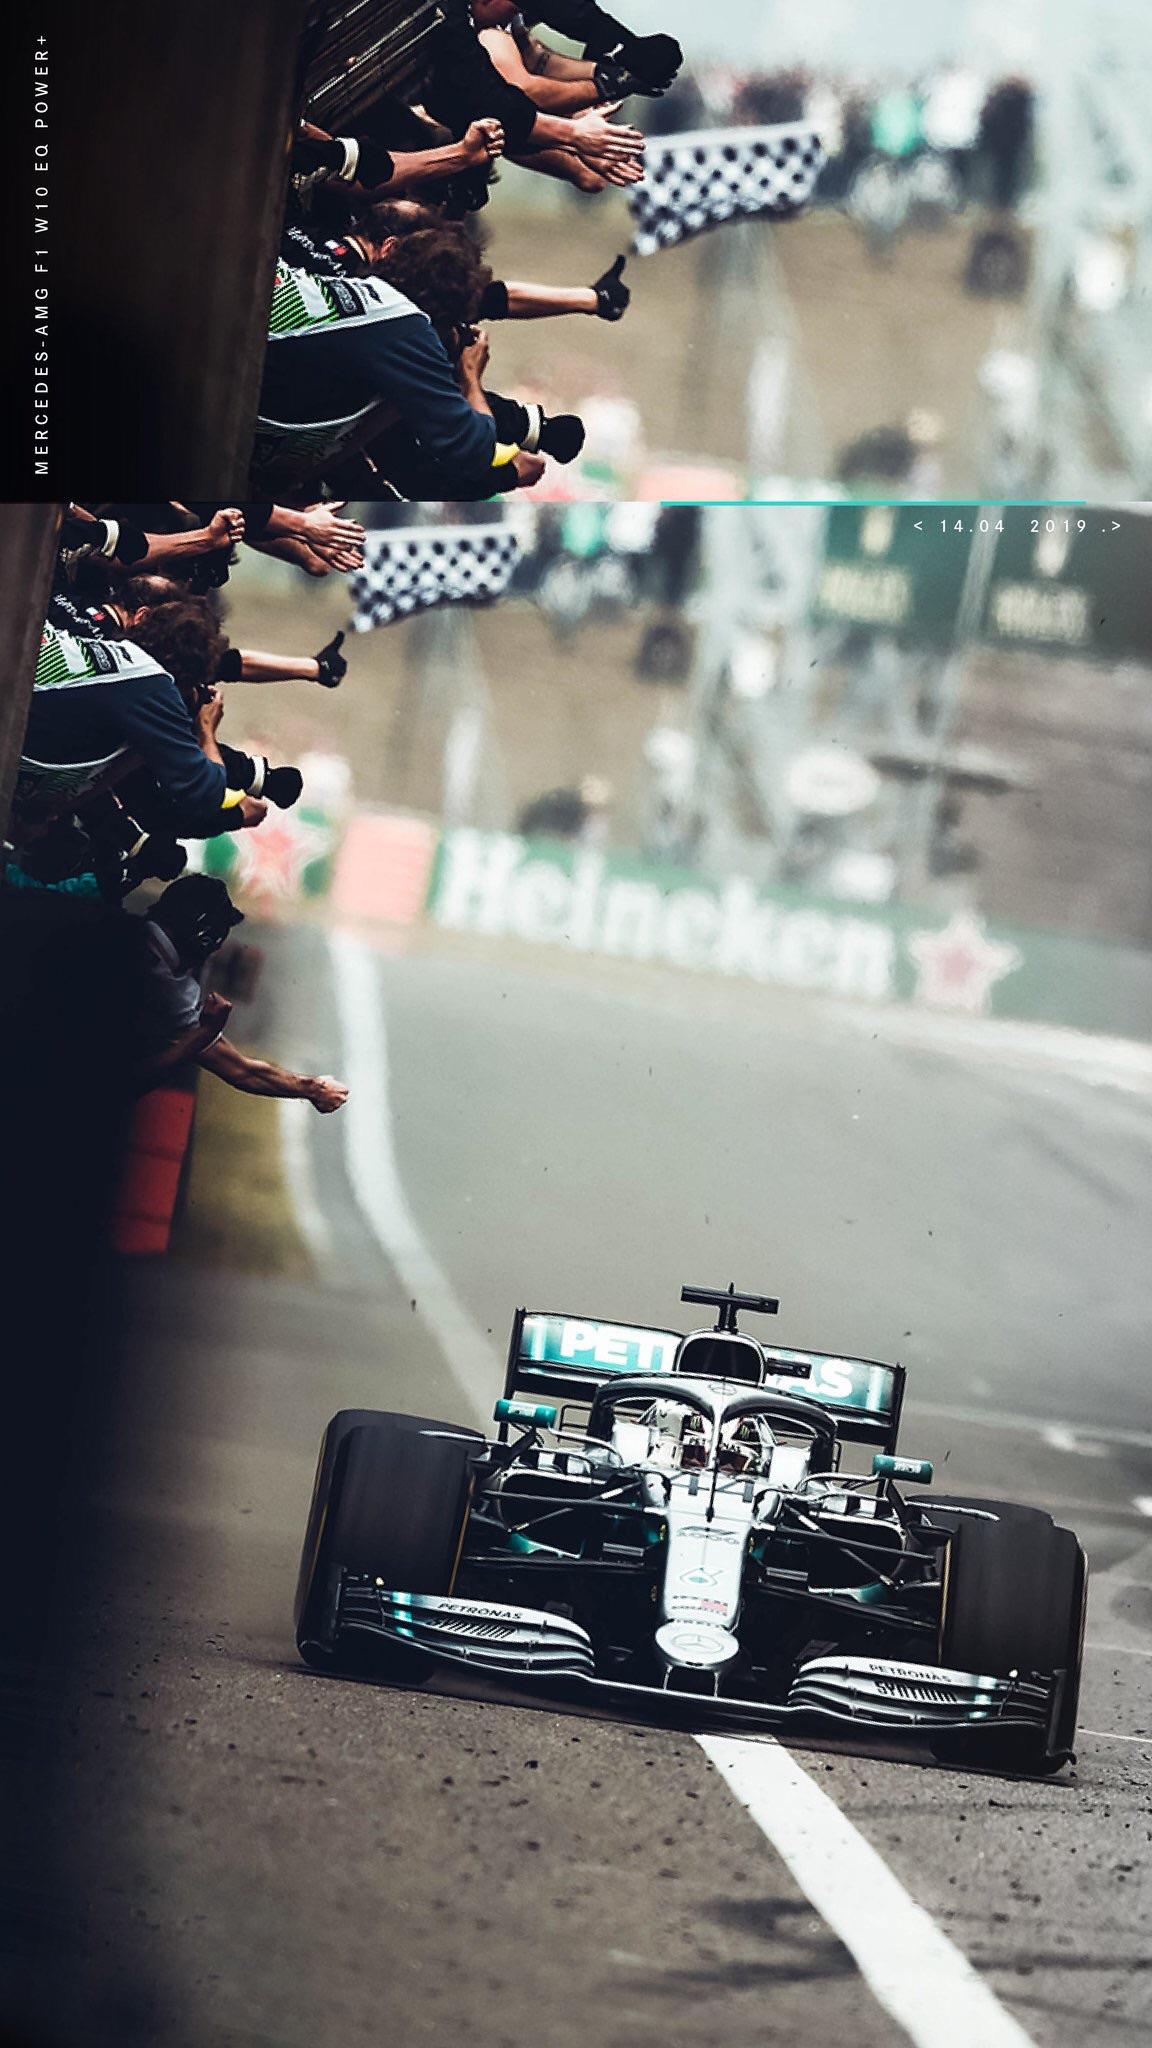 Fiddled with making F1 iPhone wallpapers so heres the ones I made of Lewis  for 21 and 22  rlewishamilton